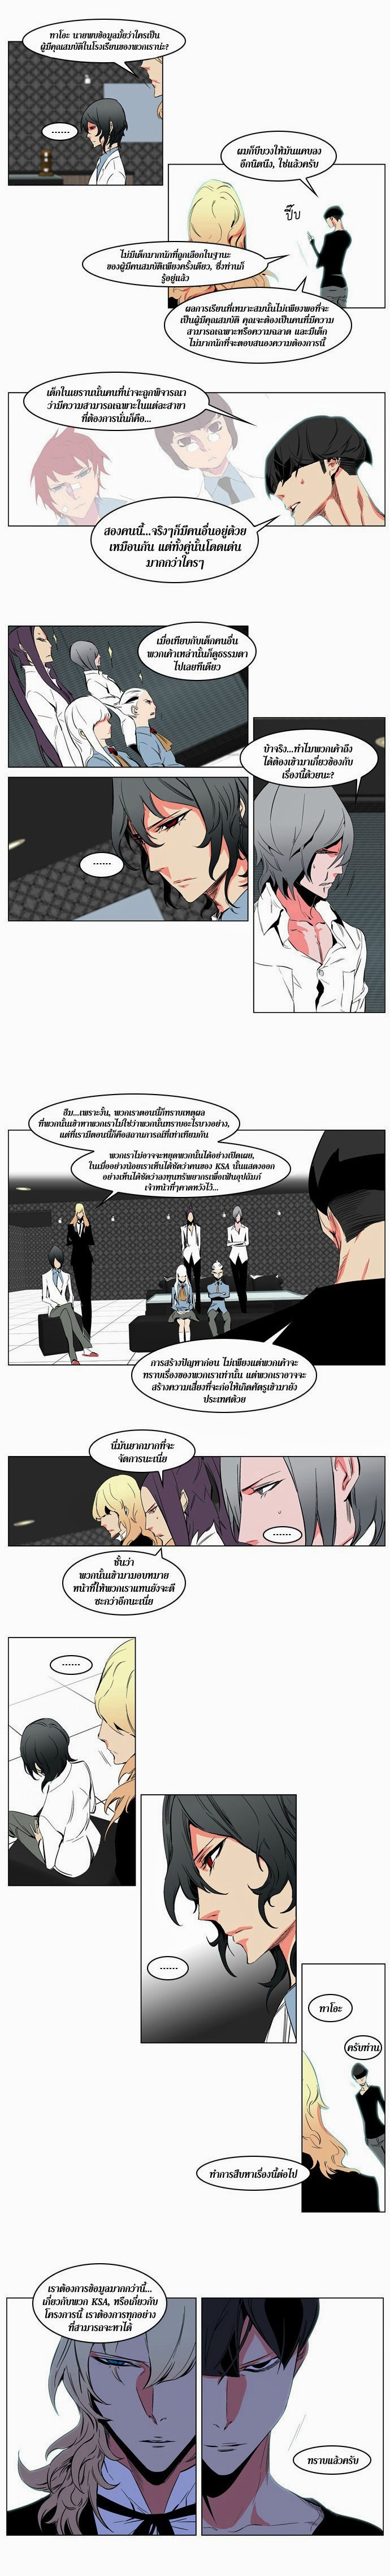 Noblesse 208 006